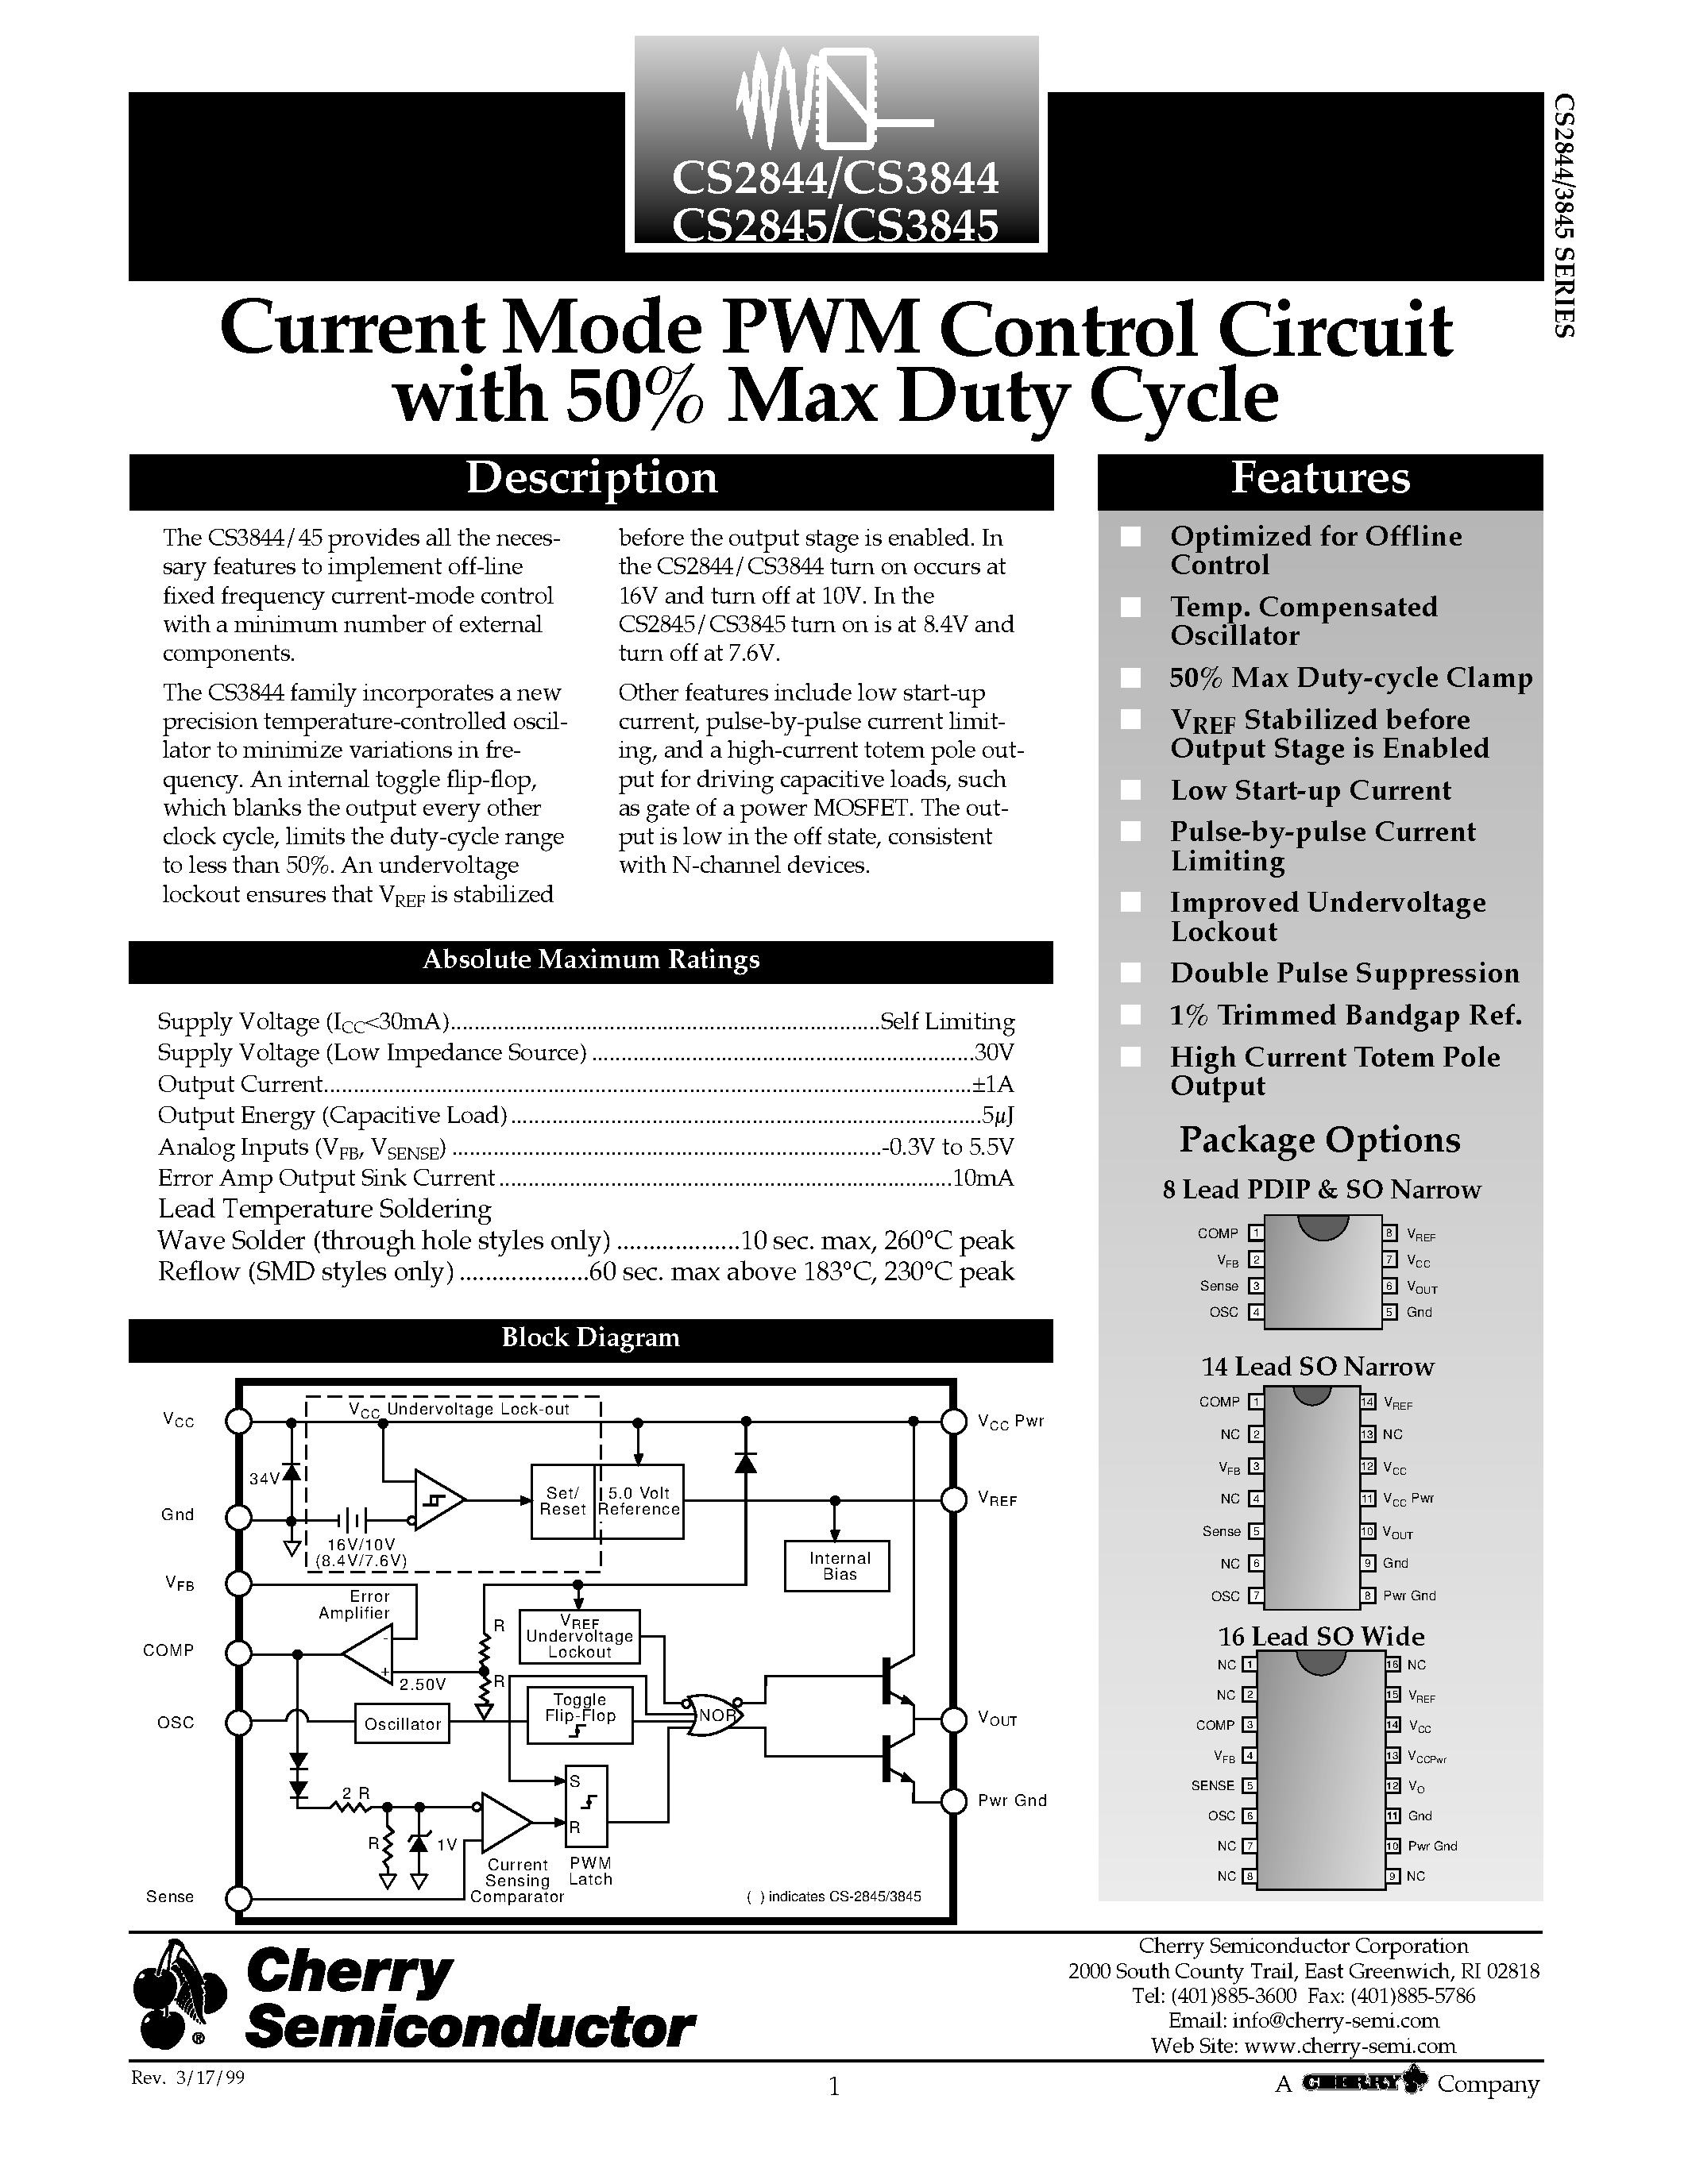 Datasheet CS2844LDWR16 - Current Mode PWM Control Circuit with 50% Max Duty Cycle page 1